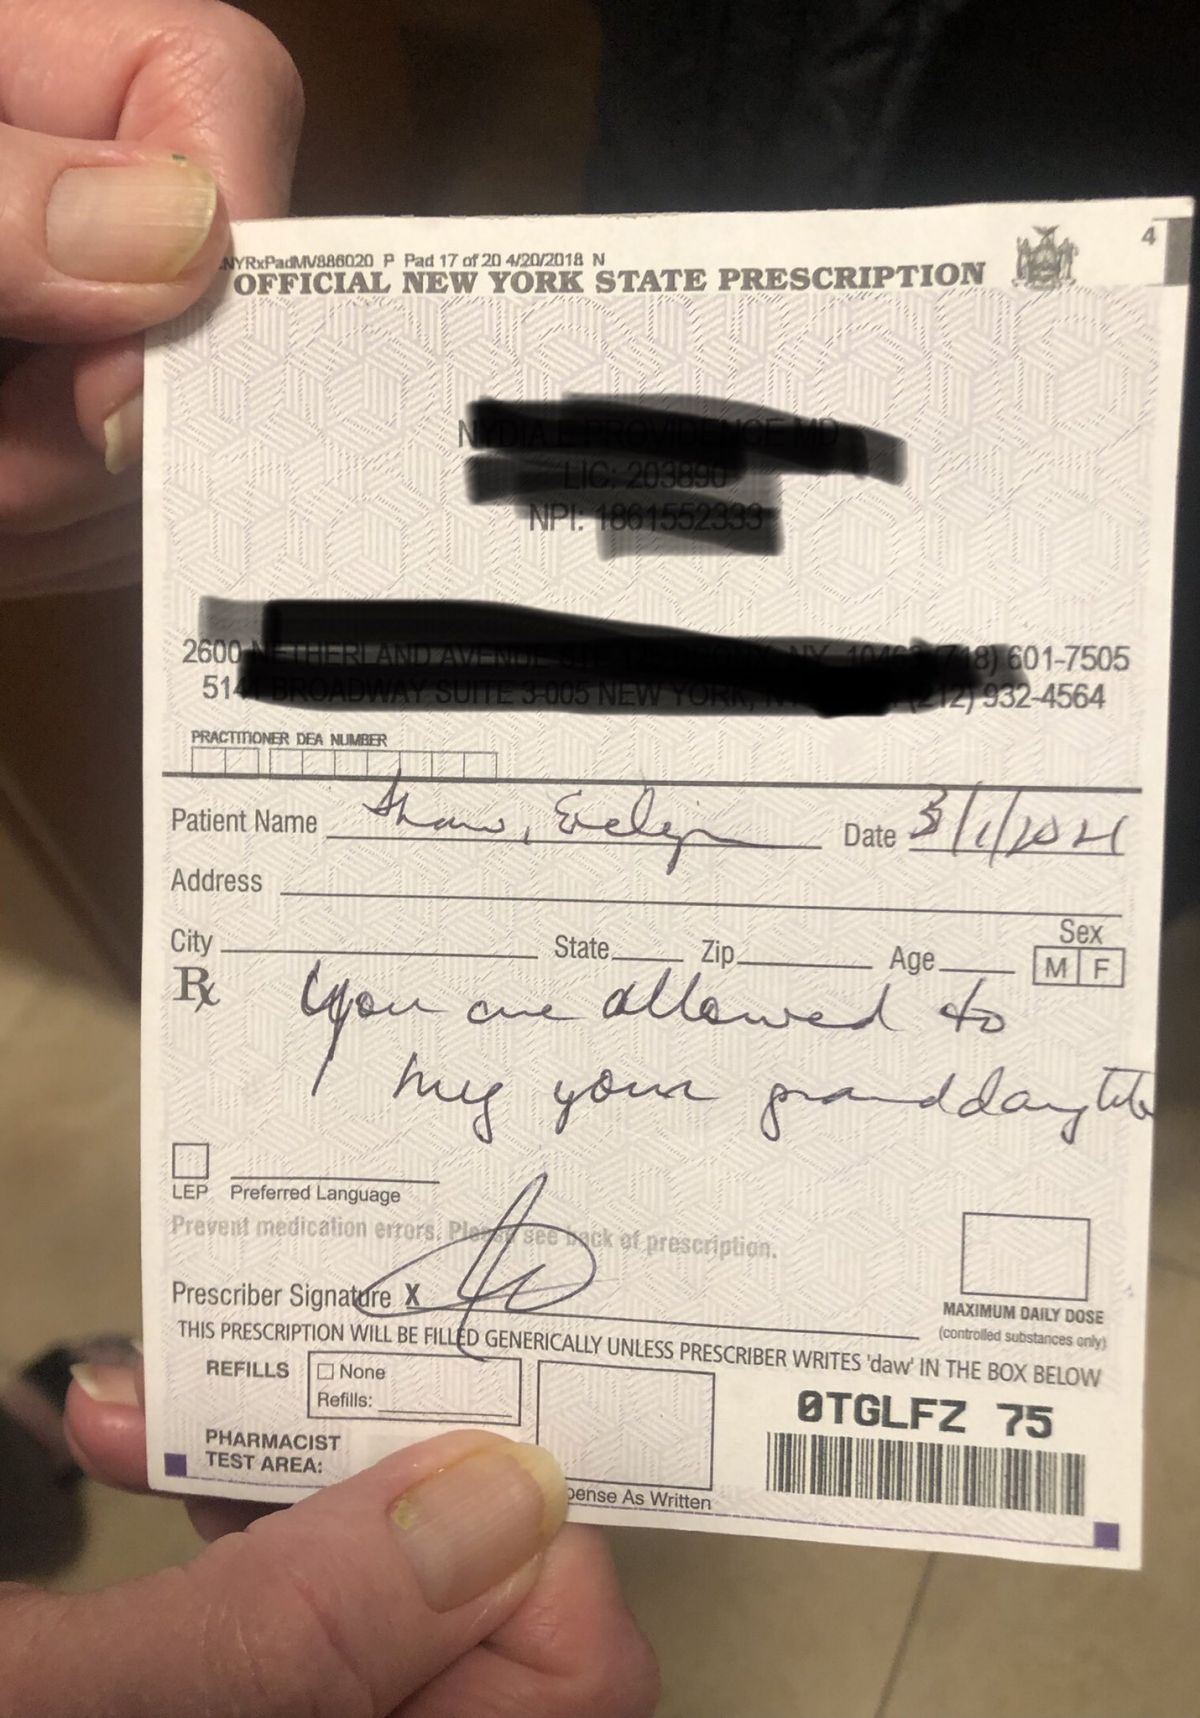 'You can hug your grandchild' prescription from doctor to elderly patient in the USA #1